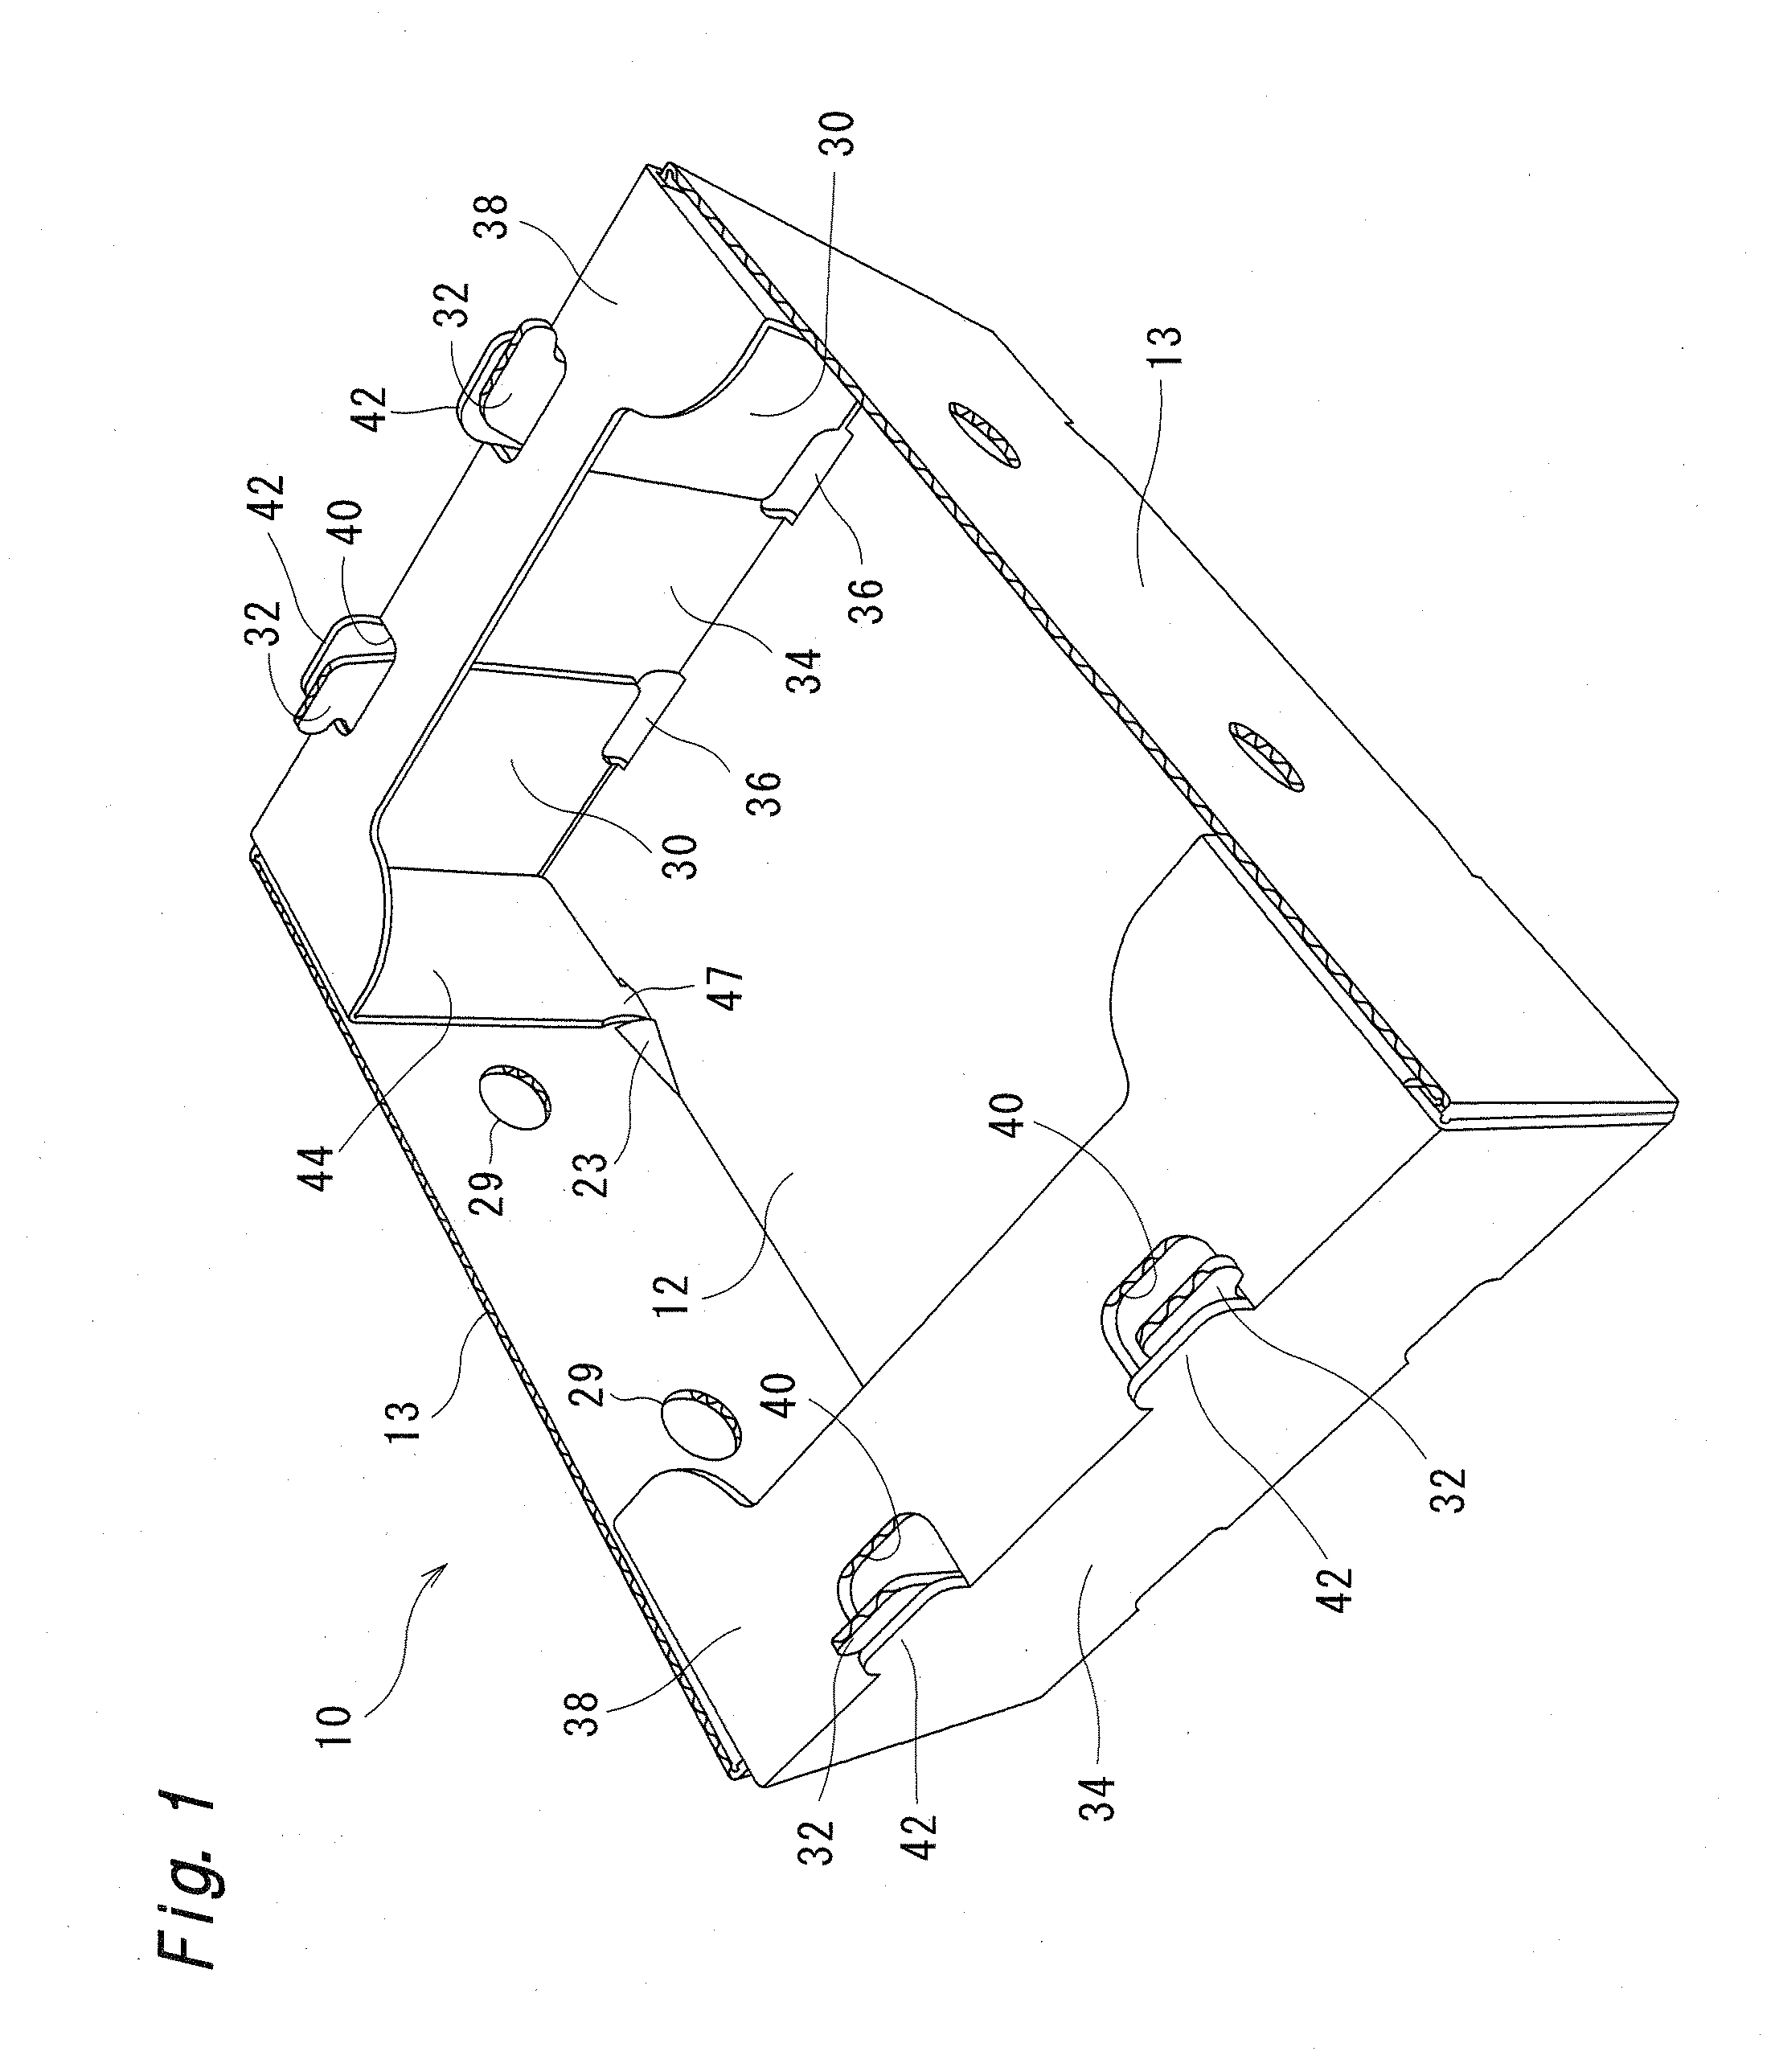 Locking structure, container utilizing locking structure, and container assembling apparatus